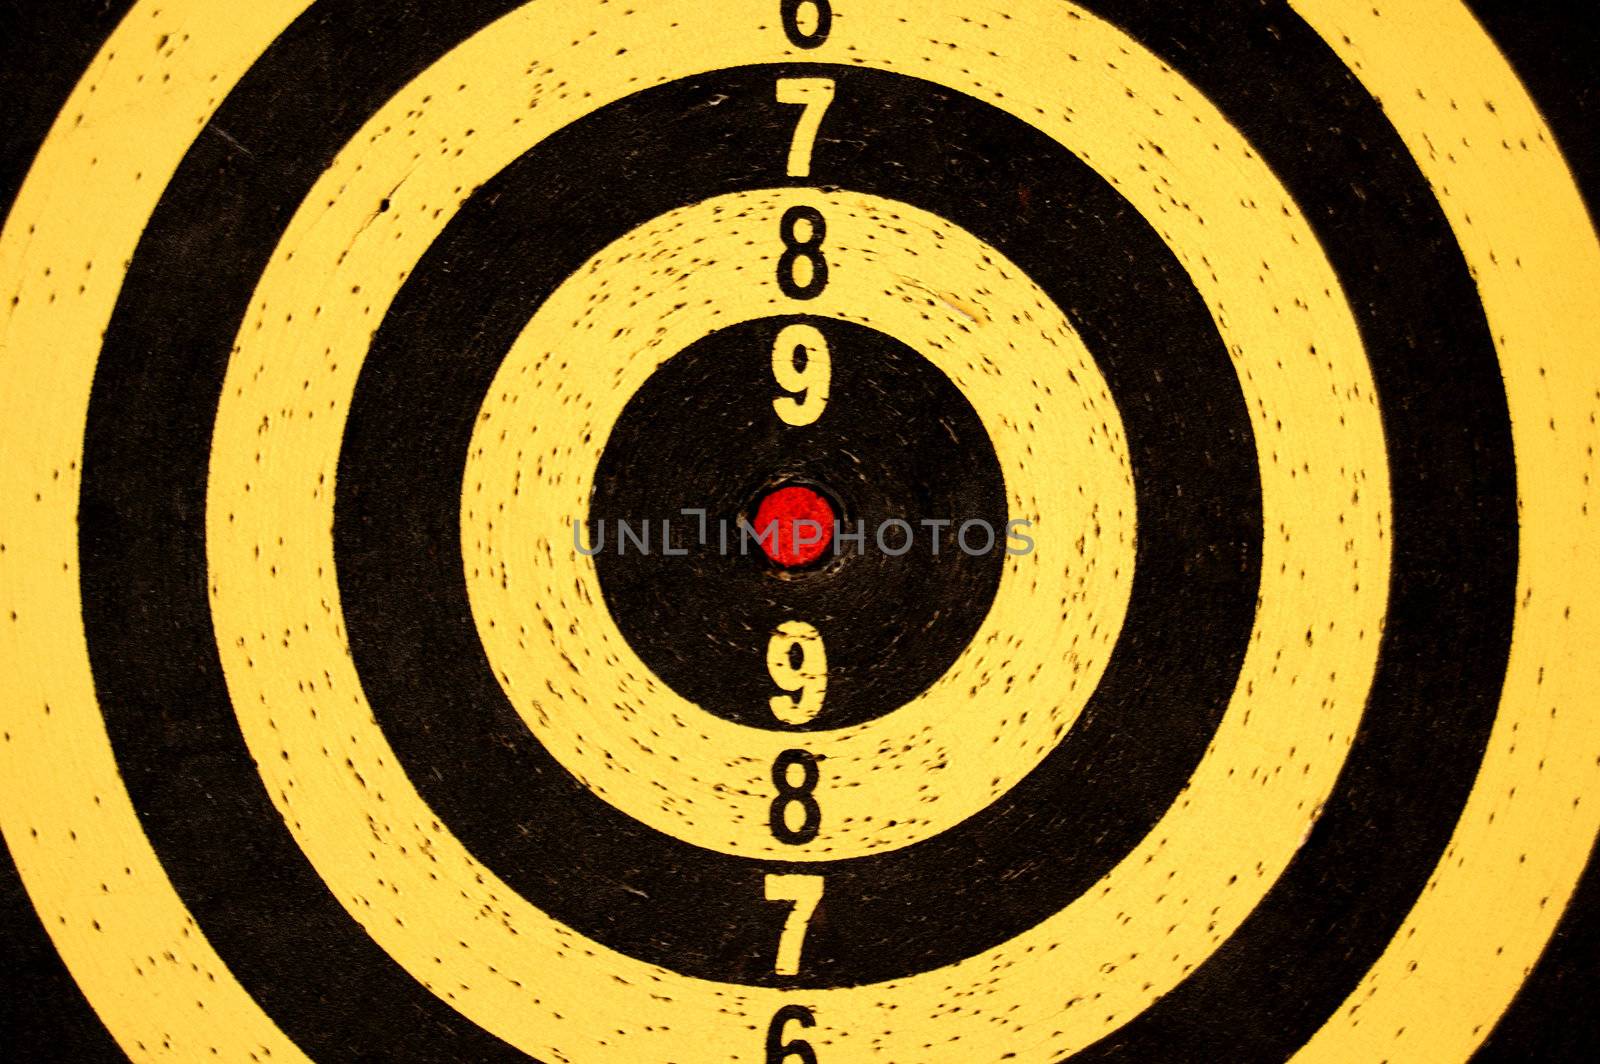 Dartboard target pattern detail. Abstract sports background.